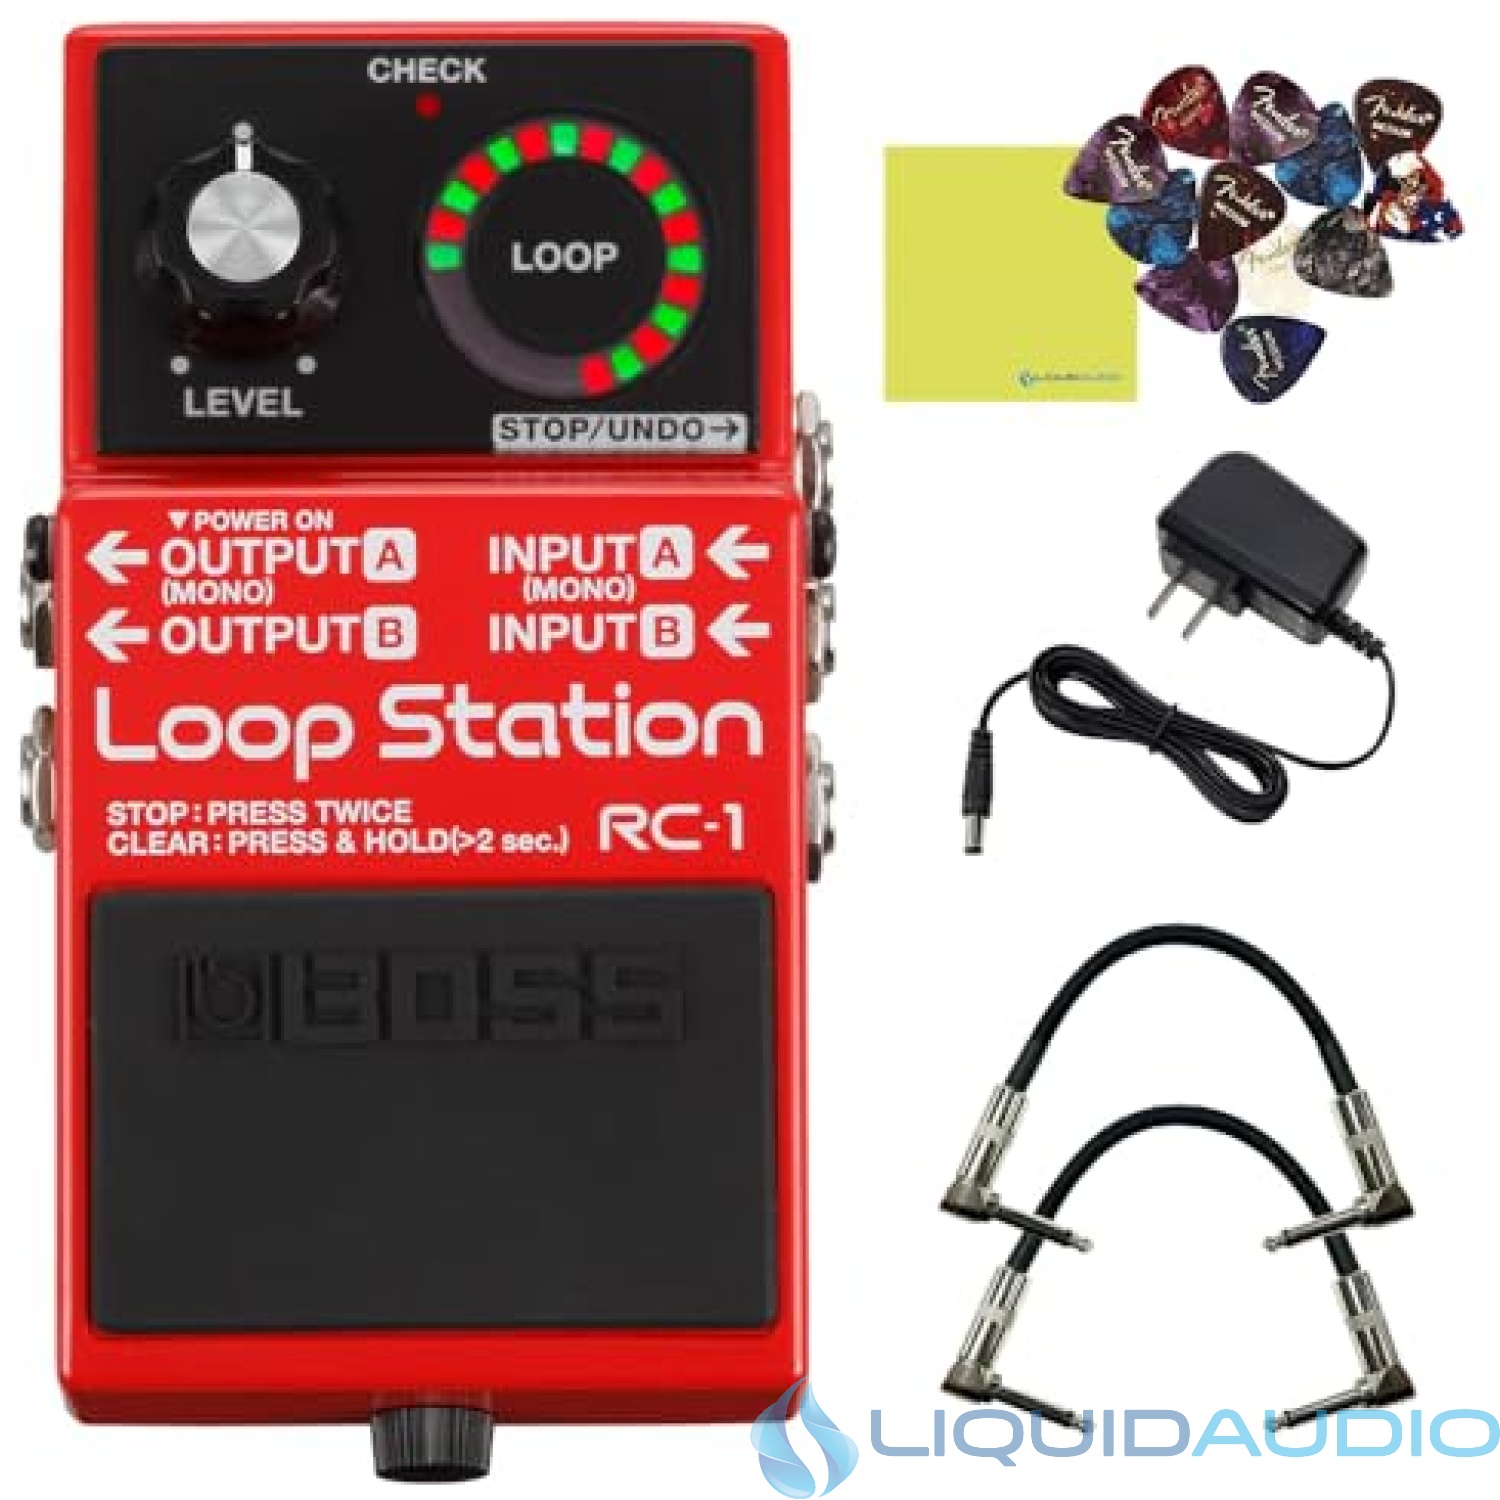 Boss RC-1 Loop Station Looper Pedal Bundle w/2x Strukture S6P48 Woven Right Angle Patch Cables, 12x Guitar Picks, 9V Power Adapter and Liquid Audio Polishing Cloth